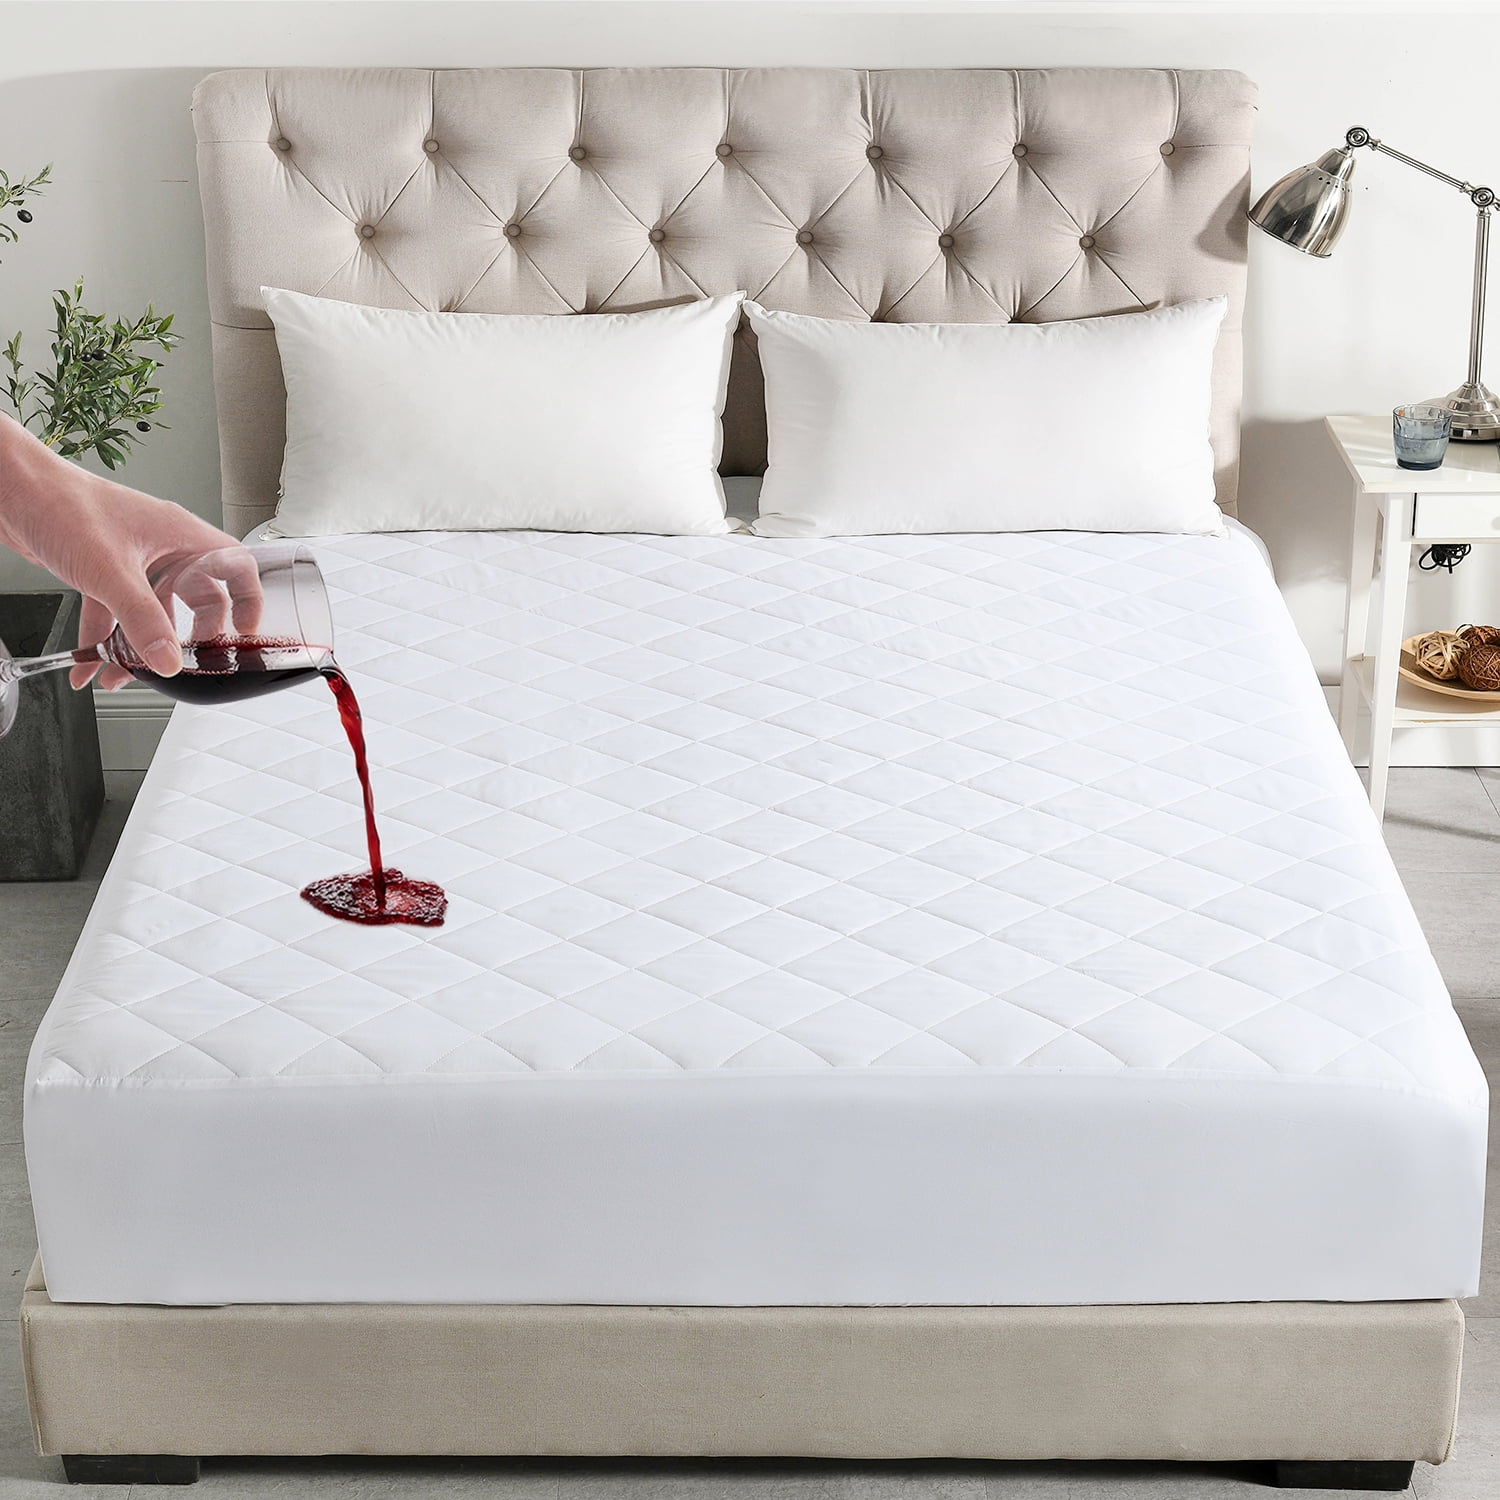 Home Collection Plastic Mattress Protector Lightweight Cover TWIN/Full/QUEEN NEW 